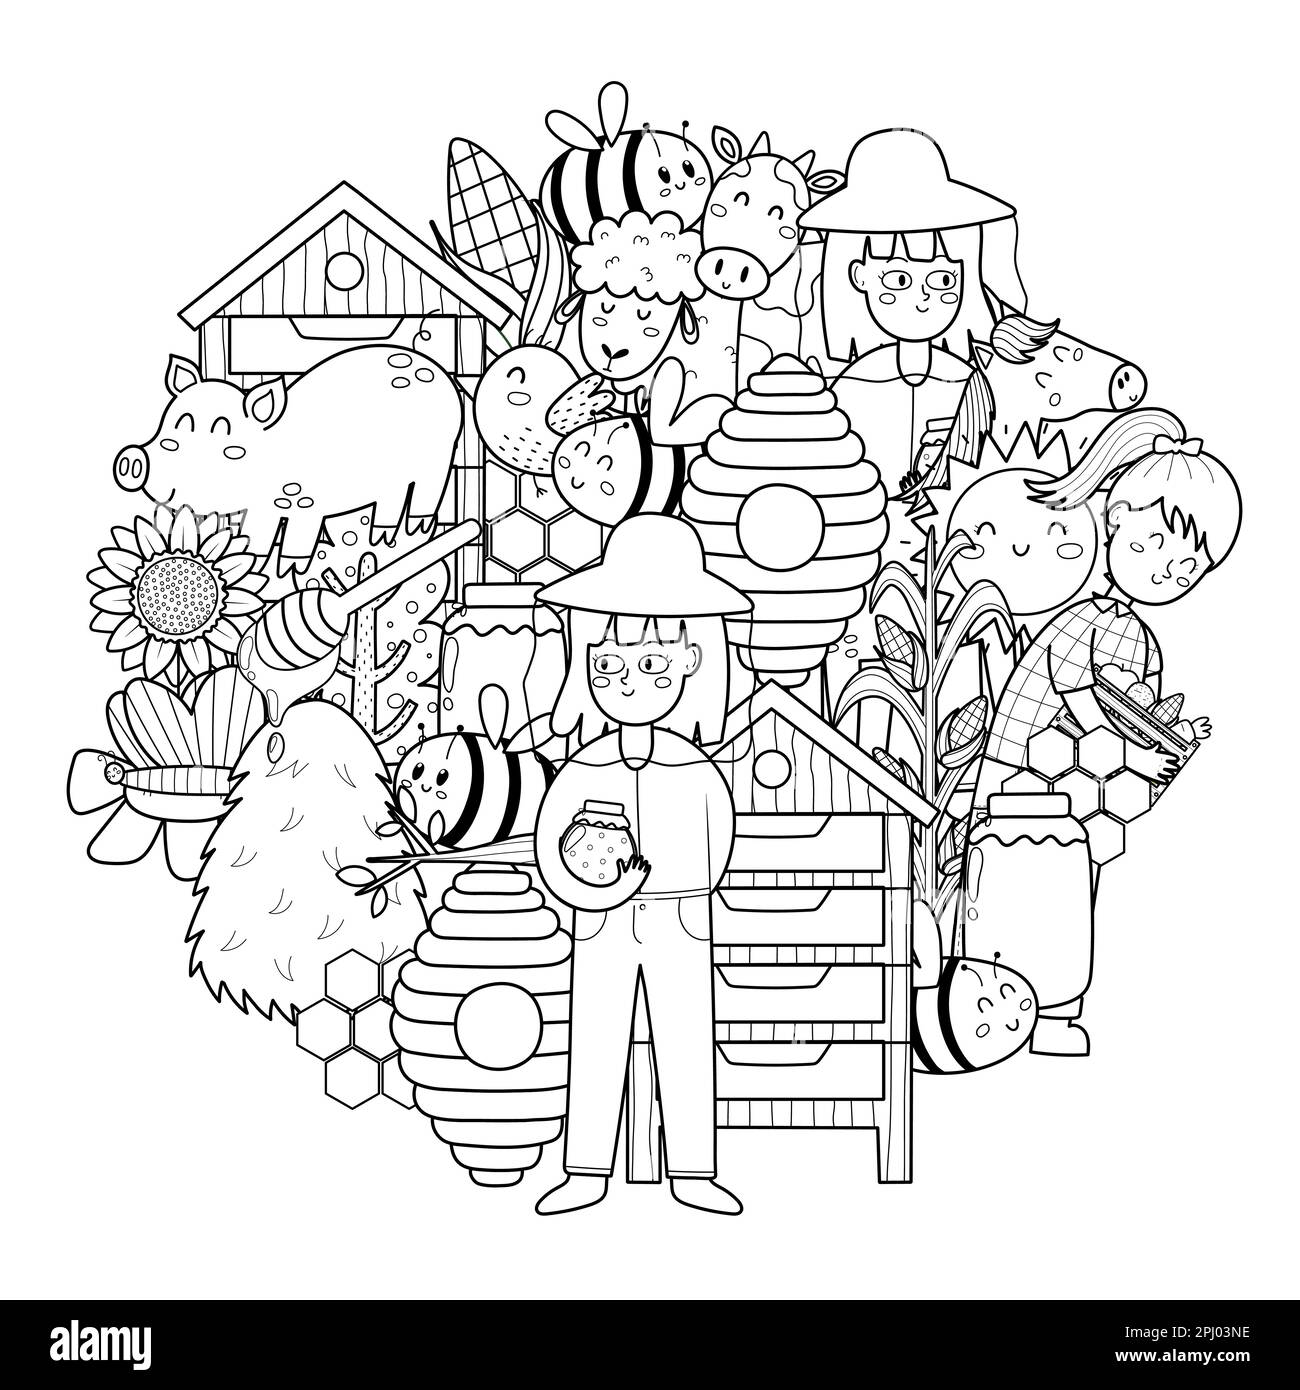 Bee and beekeeper circle shape coloring page. Doodle mandala with farm characters for coloring book Stock Vector